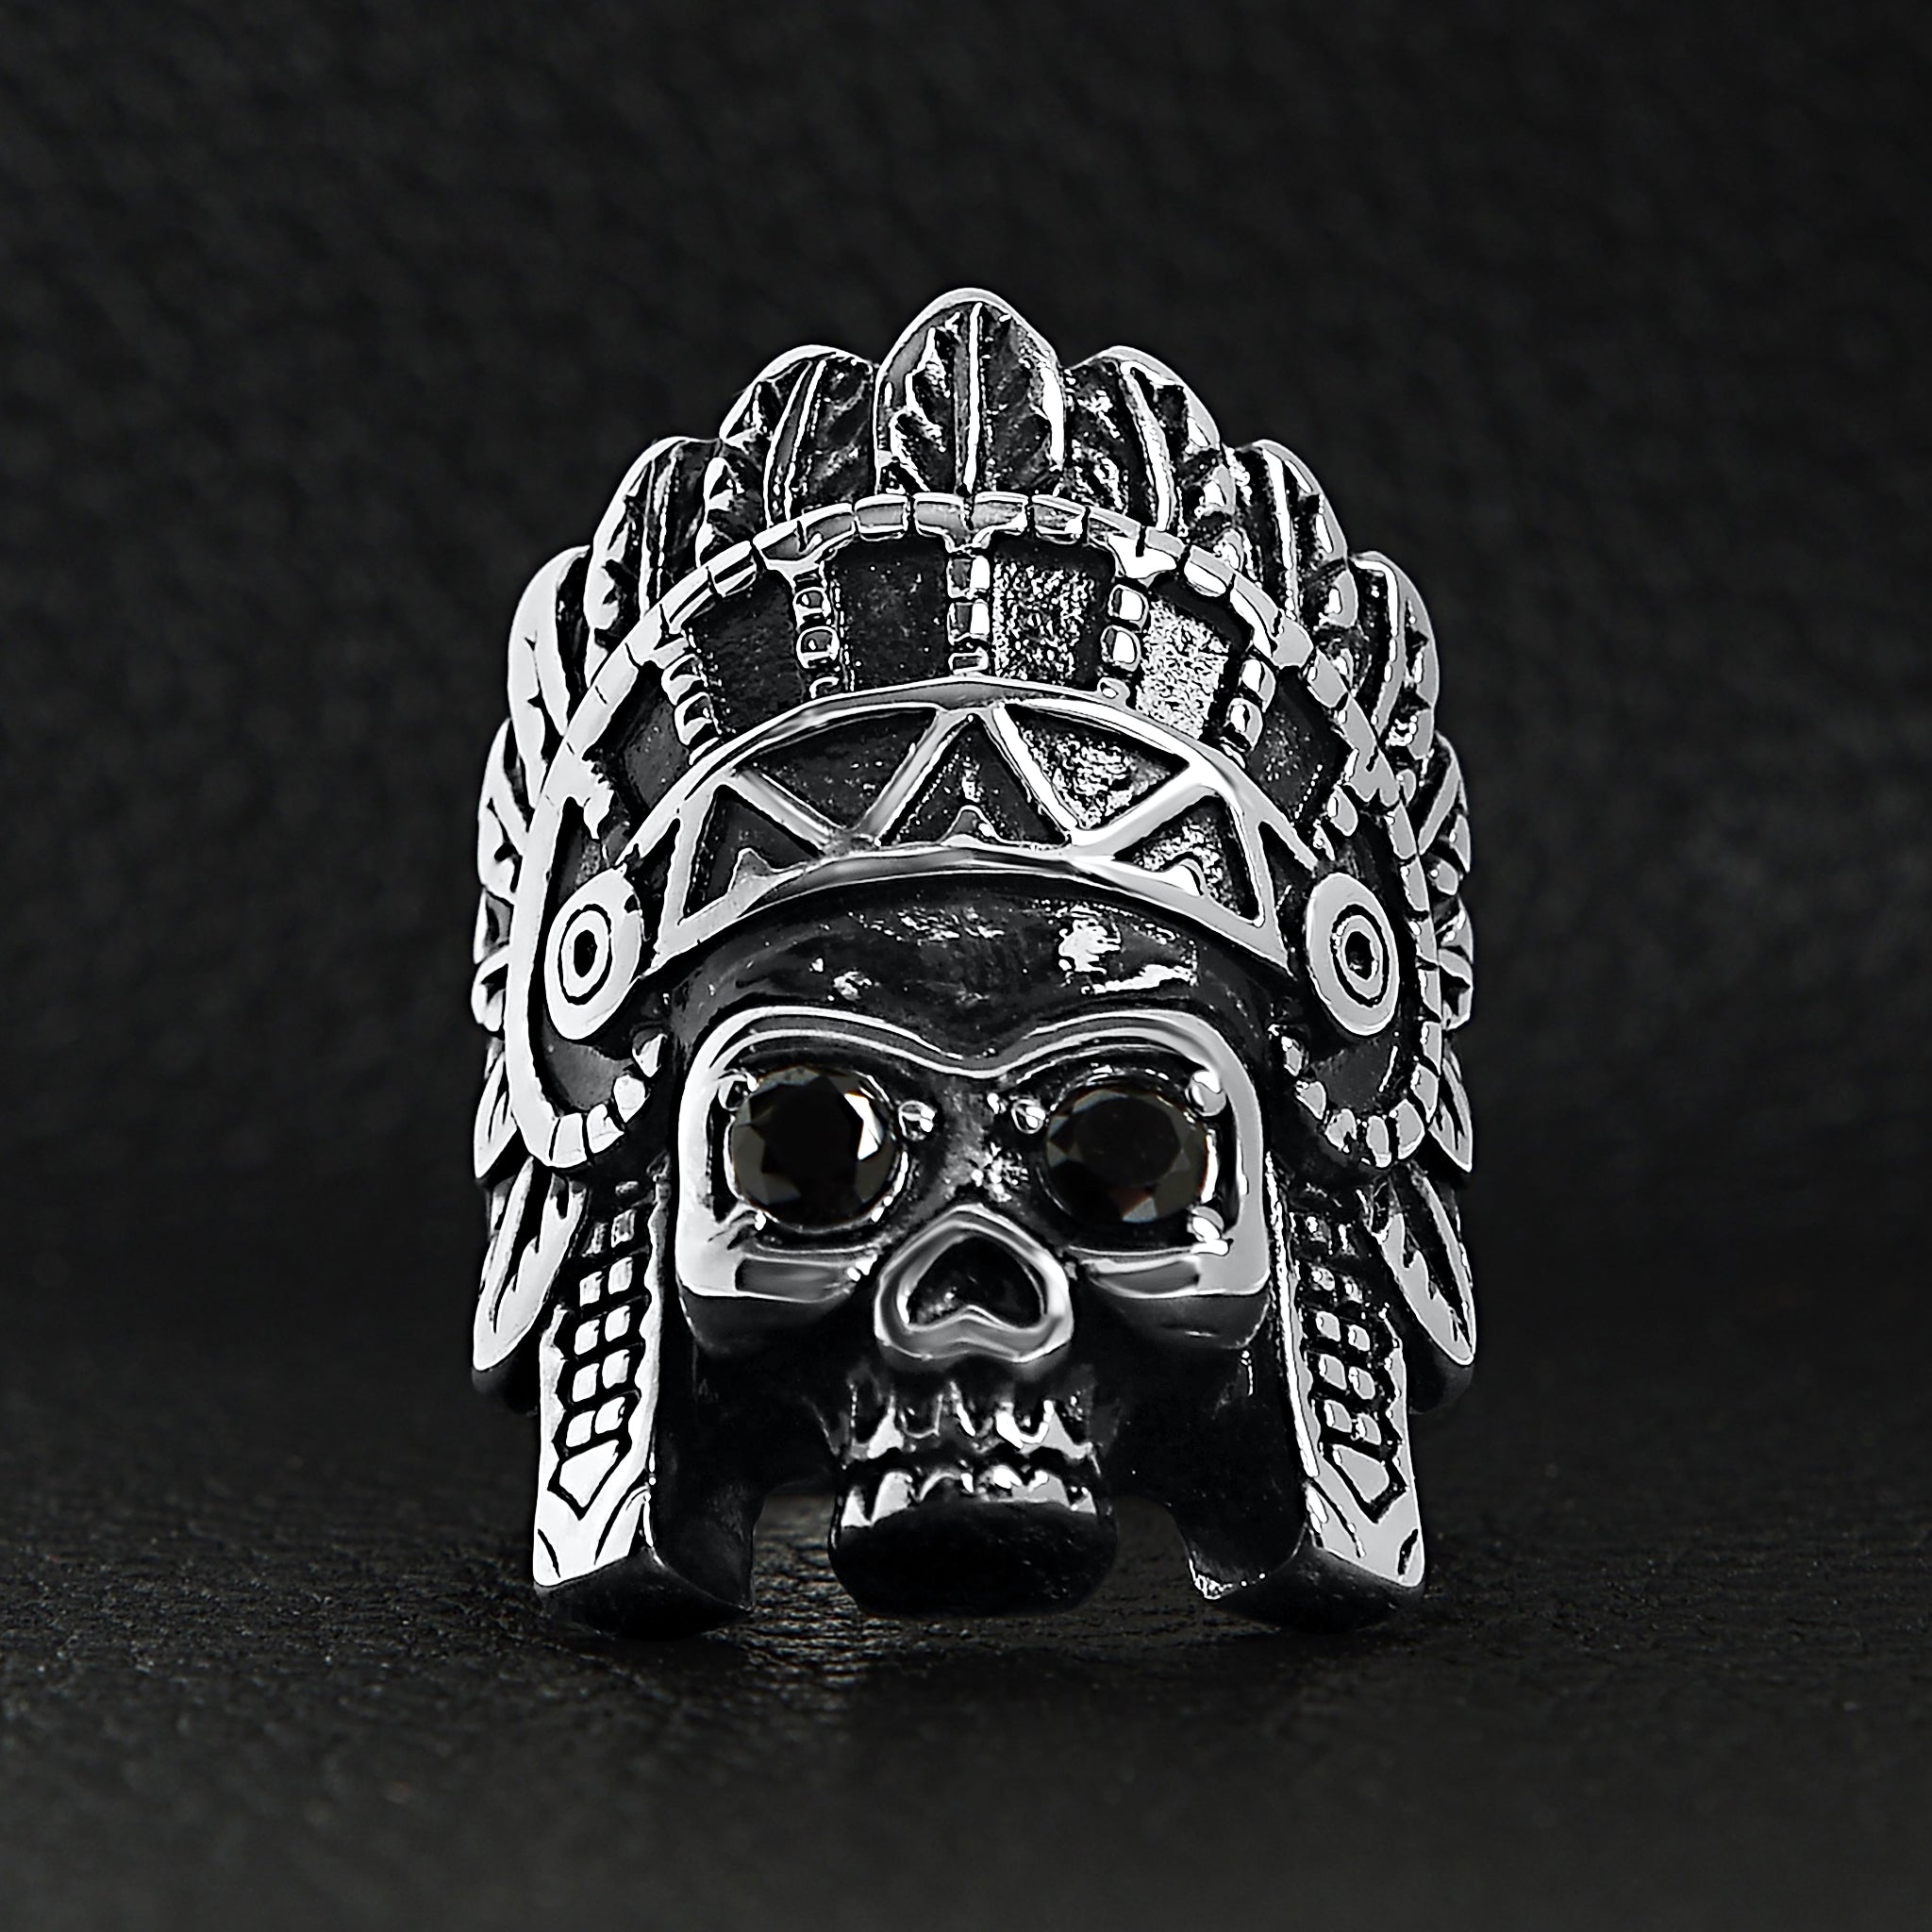 Stainless Steel Native American Chief Skull Ring with Black CZ Stone - Jewelry & Watches - Bijou Her -  -  - 